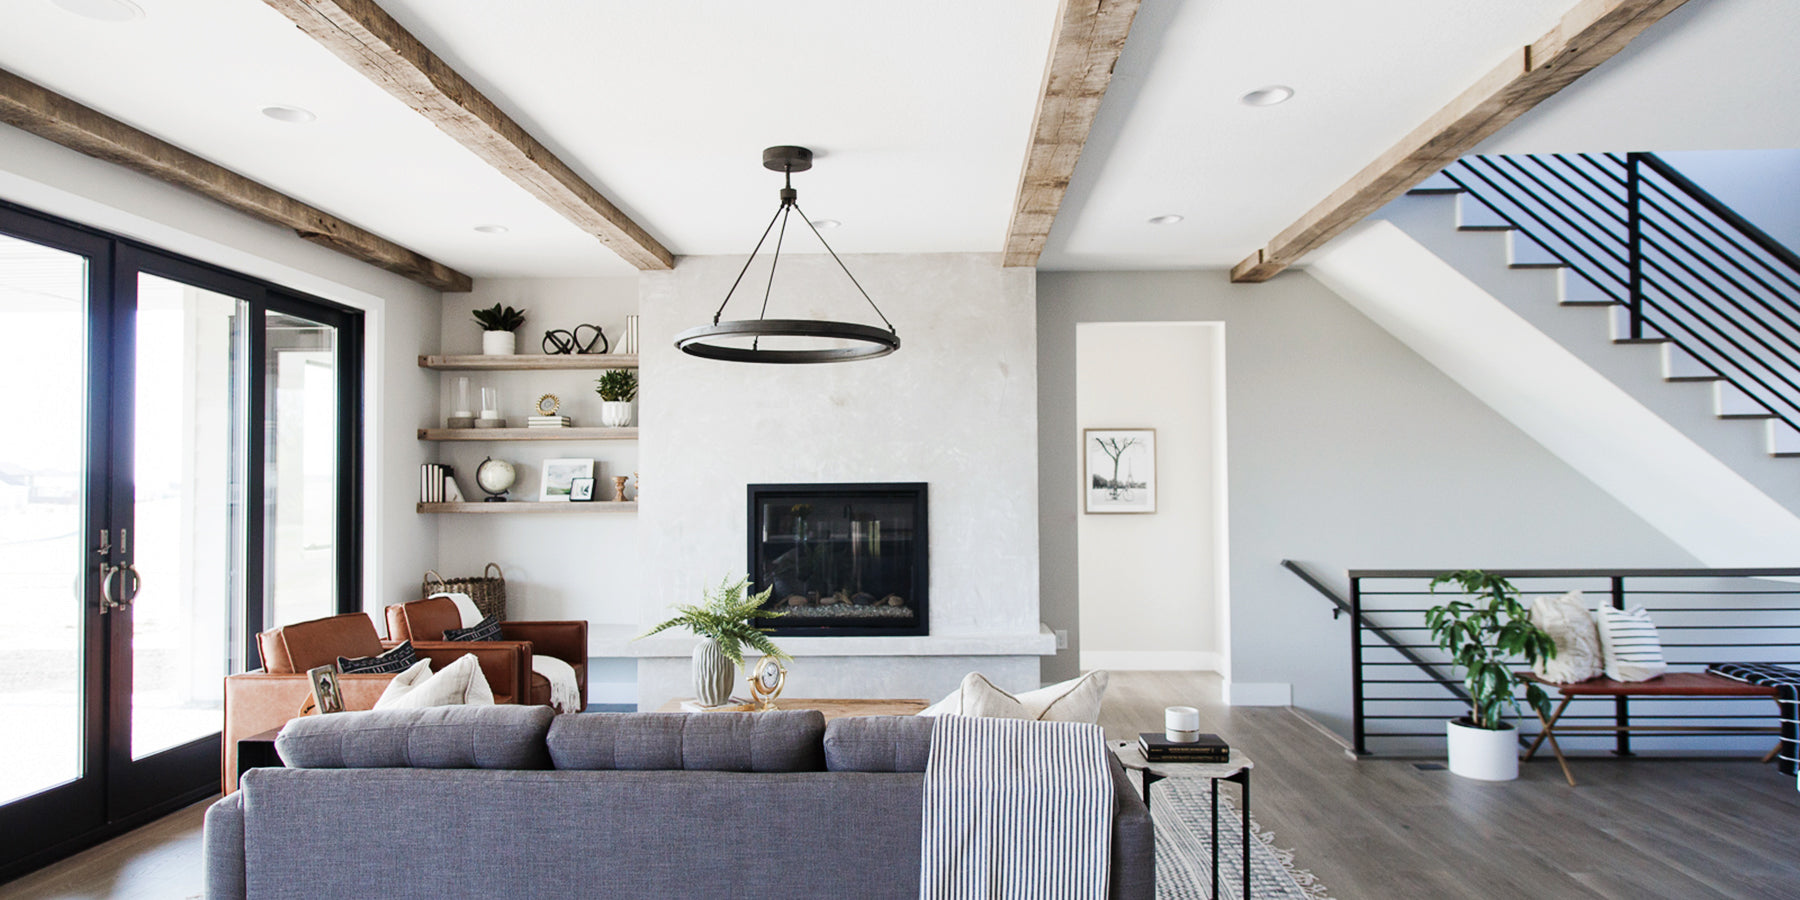 Modern Farmhouse Ceiling Beams - Light Wood Reclaimed Wood Ceiling Beams - Timbers in Living Room - Wood Floating Shelves by Fireplace - Dakota Timber Co Fargo